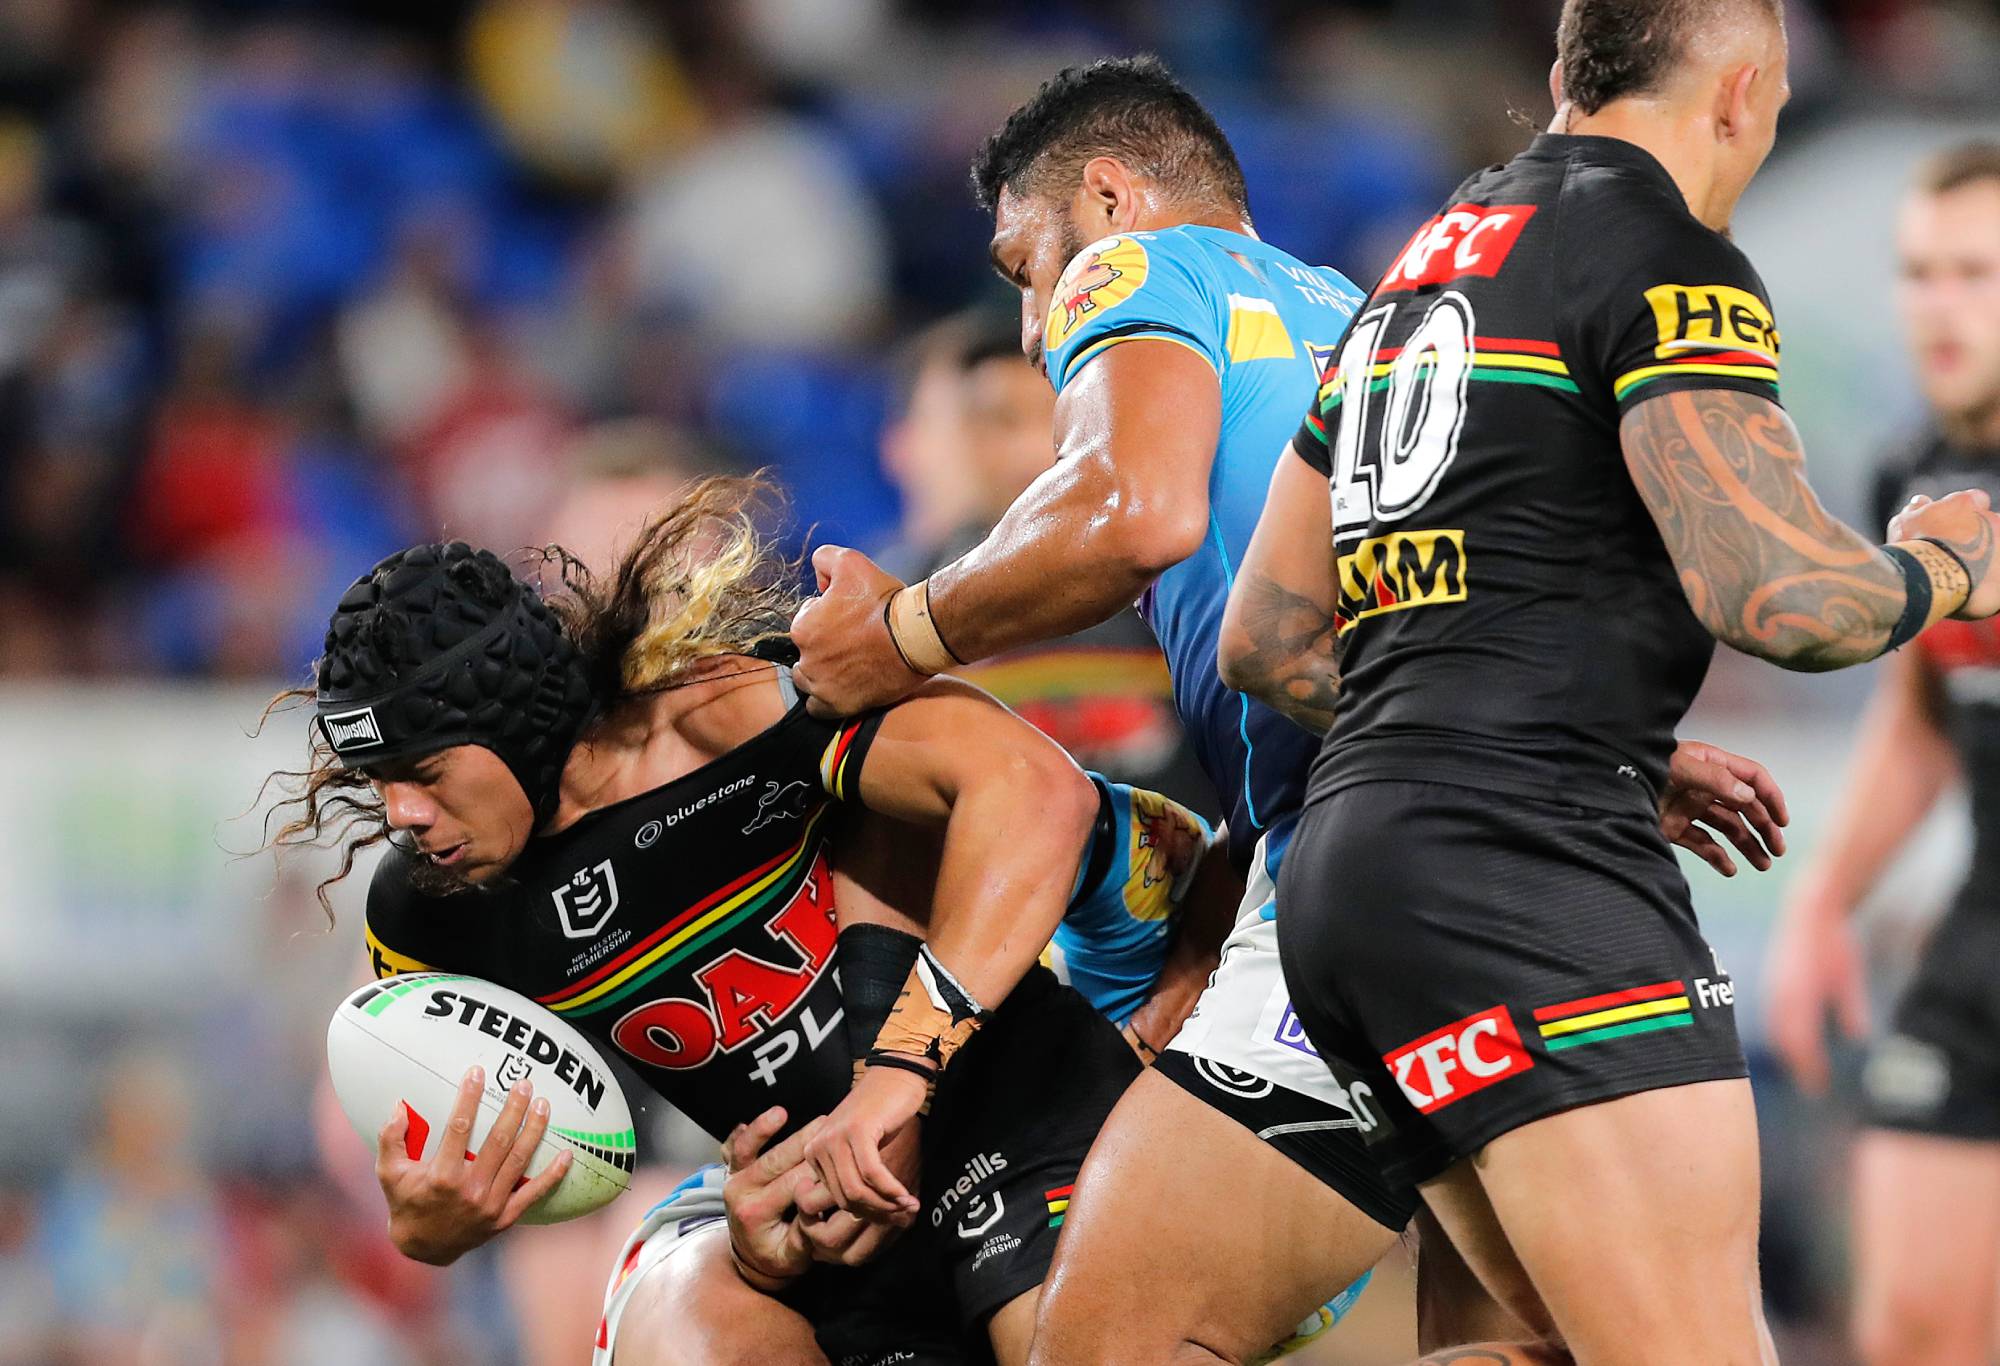 GOLD COAST, AUSTRALIA - AUGUST 19: Jarome Luai of Panthers is challenged by Jacob Alick of Titans during the round 25 NRL match between Gold Coast Titans and Penrith Panthers at Cbus Super Stadium on August 19, 2023 in Gold Coast, Australia. (Photo by Getty Images/Getty Images)